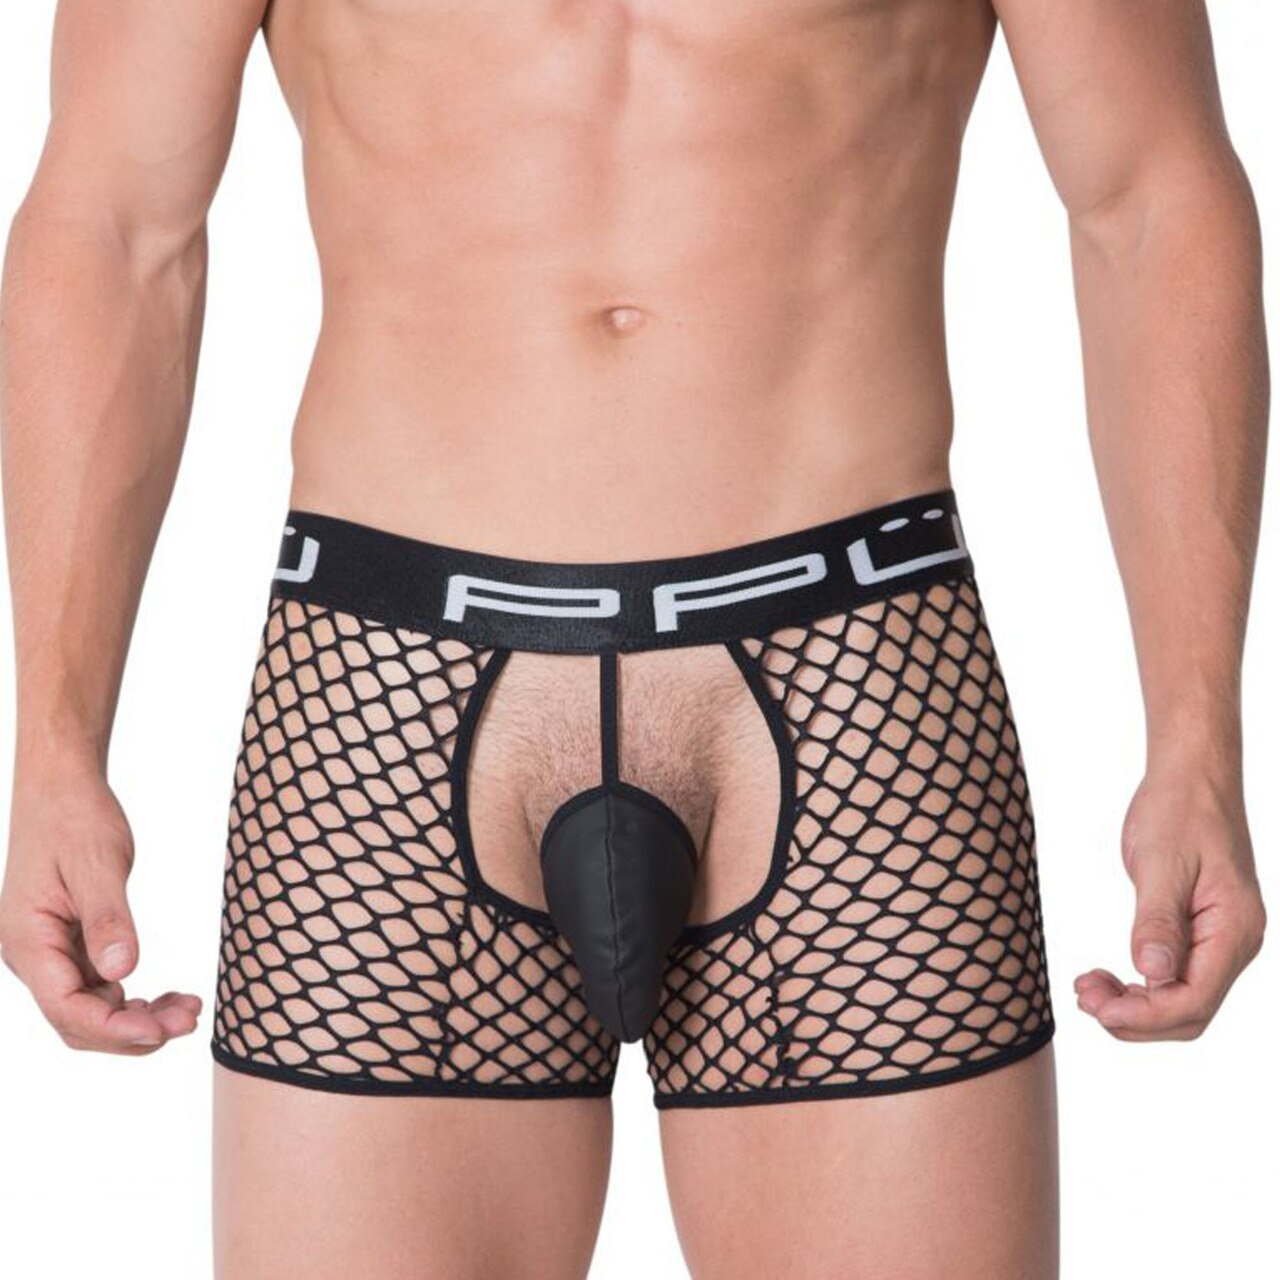 SALE - Mens PPU Underwear Open Front Shorts with Pouch Black